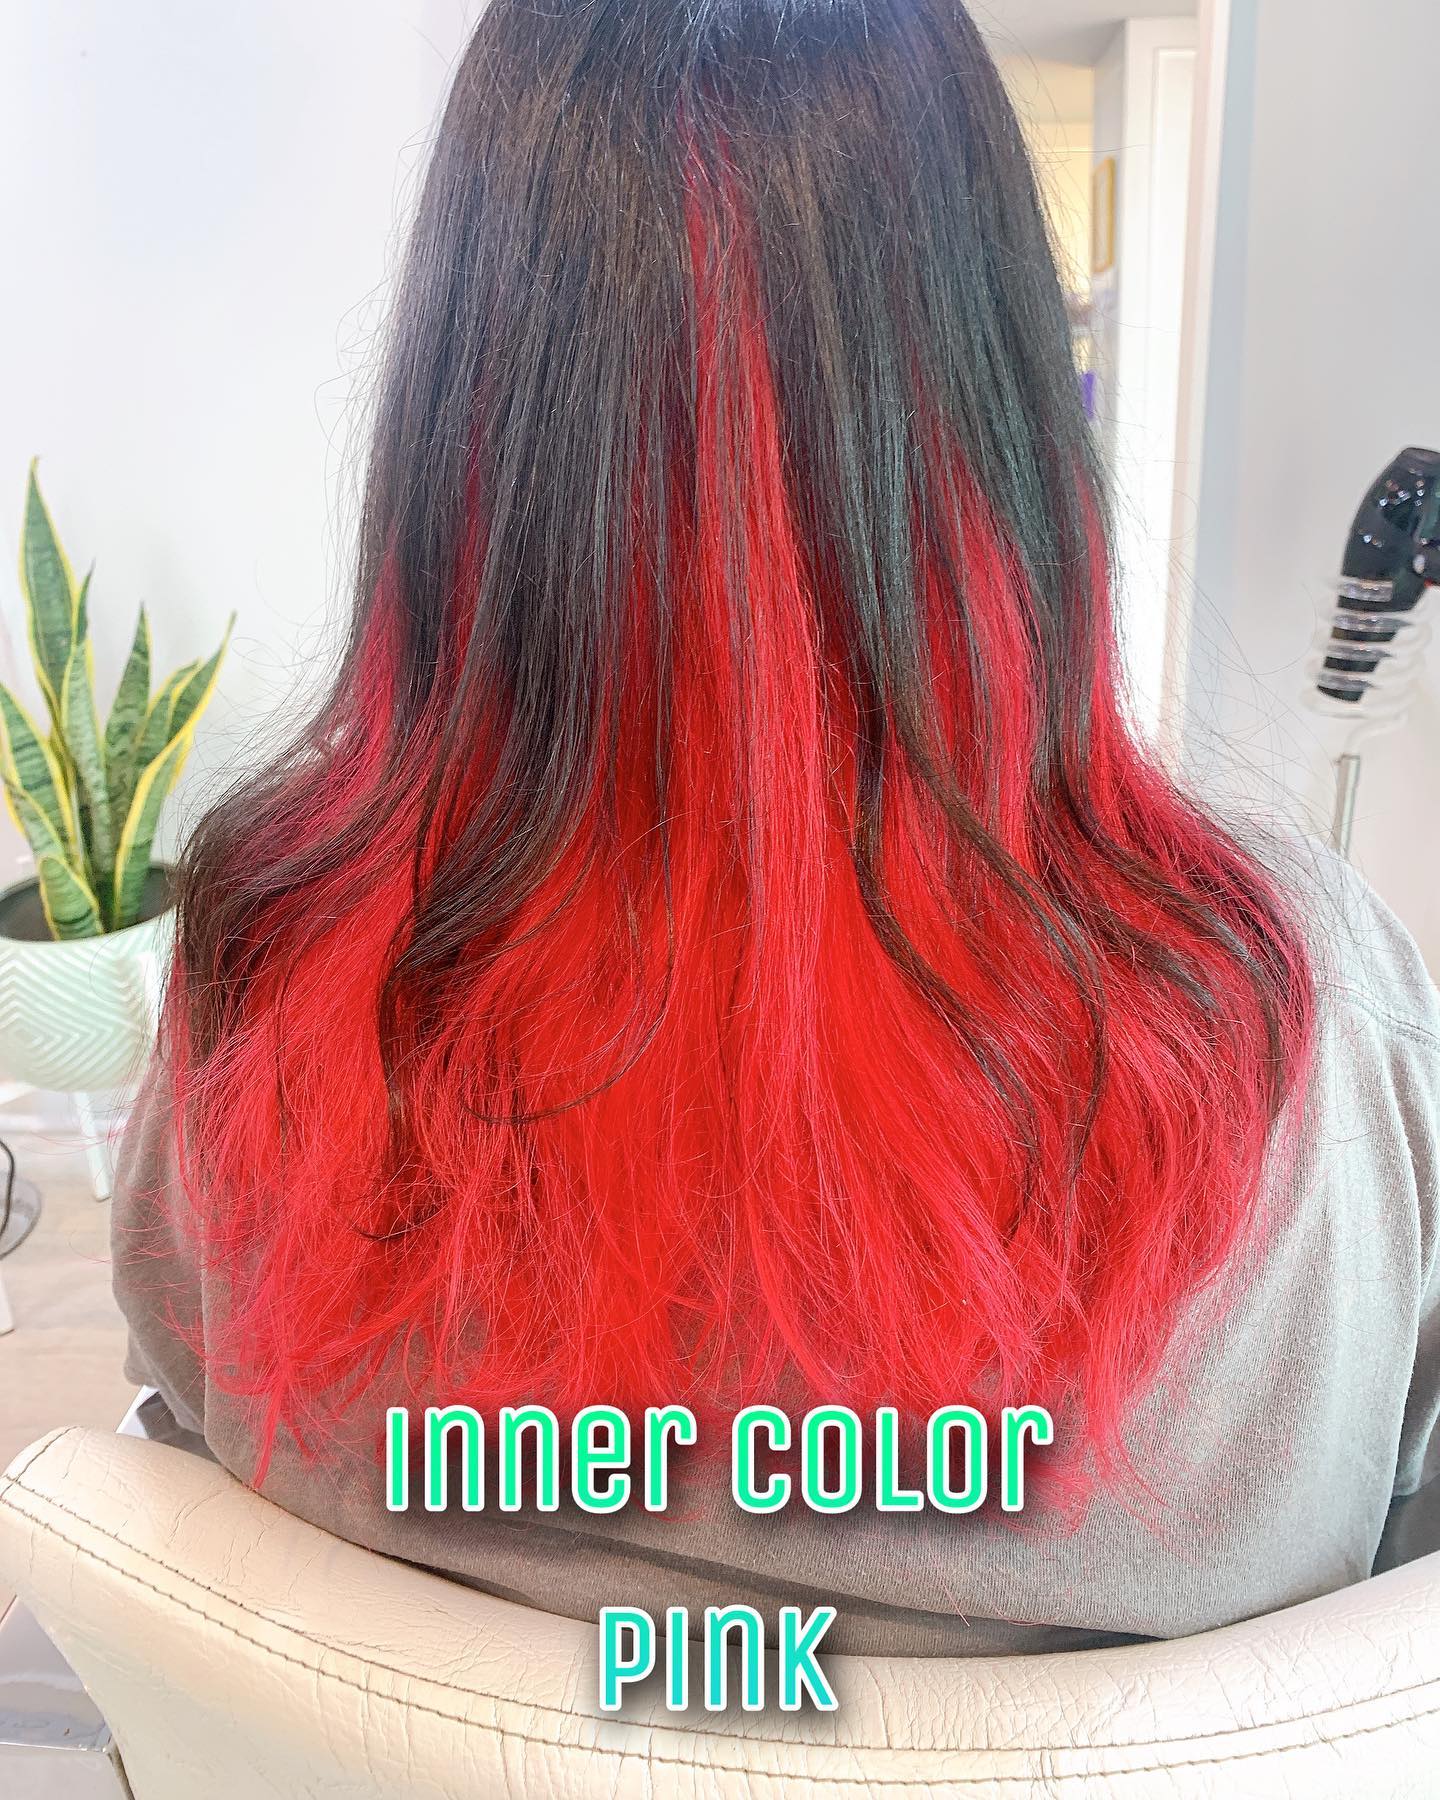 pinkにさせてもらいました。  #innercolor #haircolor @cloverhair2